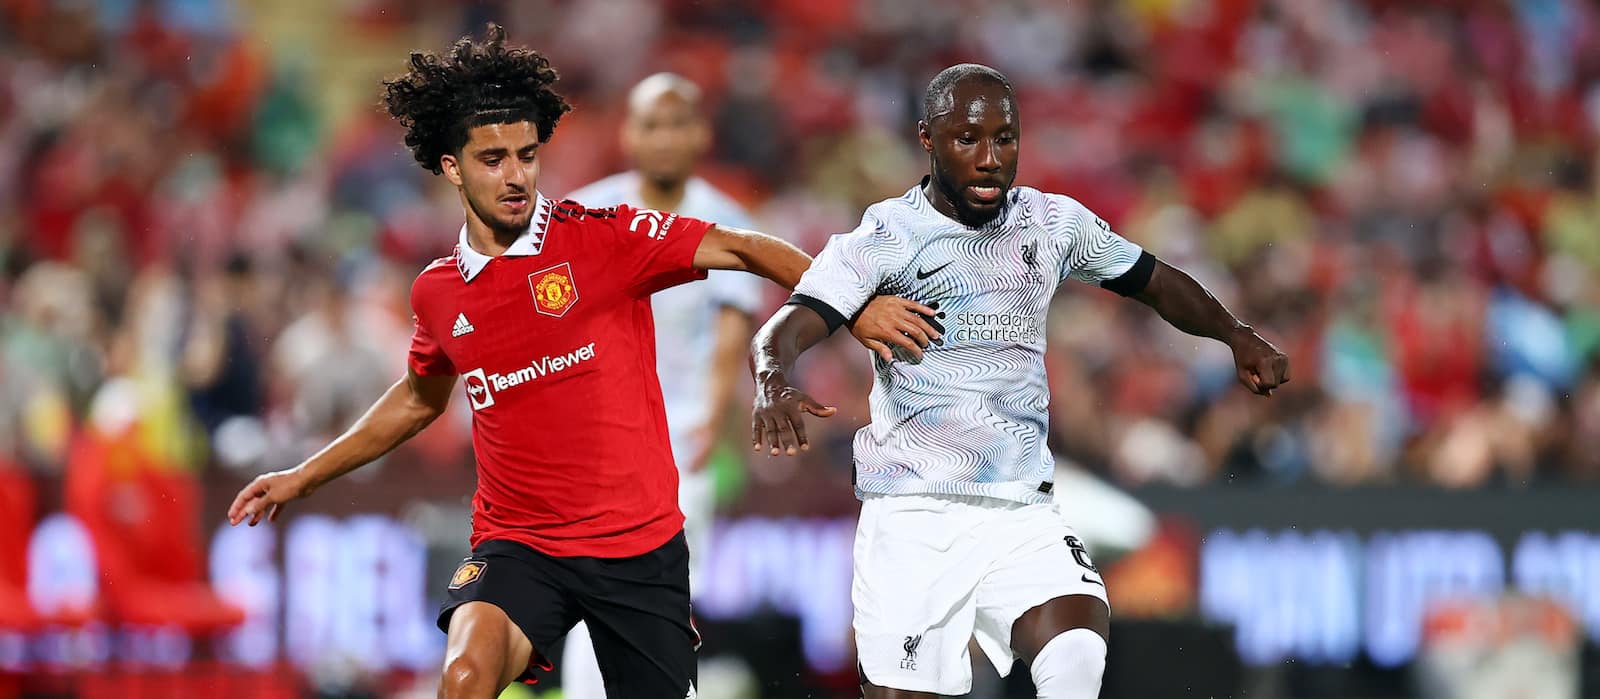        Erik ten Hag has asked manchester united not to sell or loan out young midfielder wizard